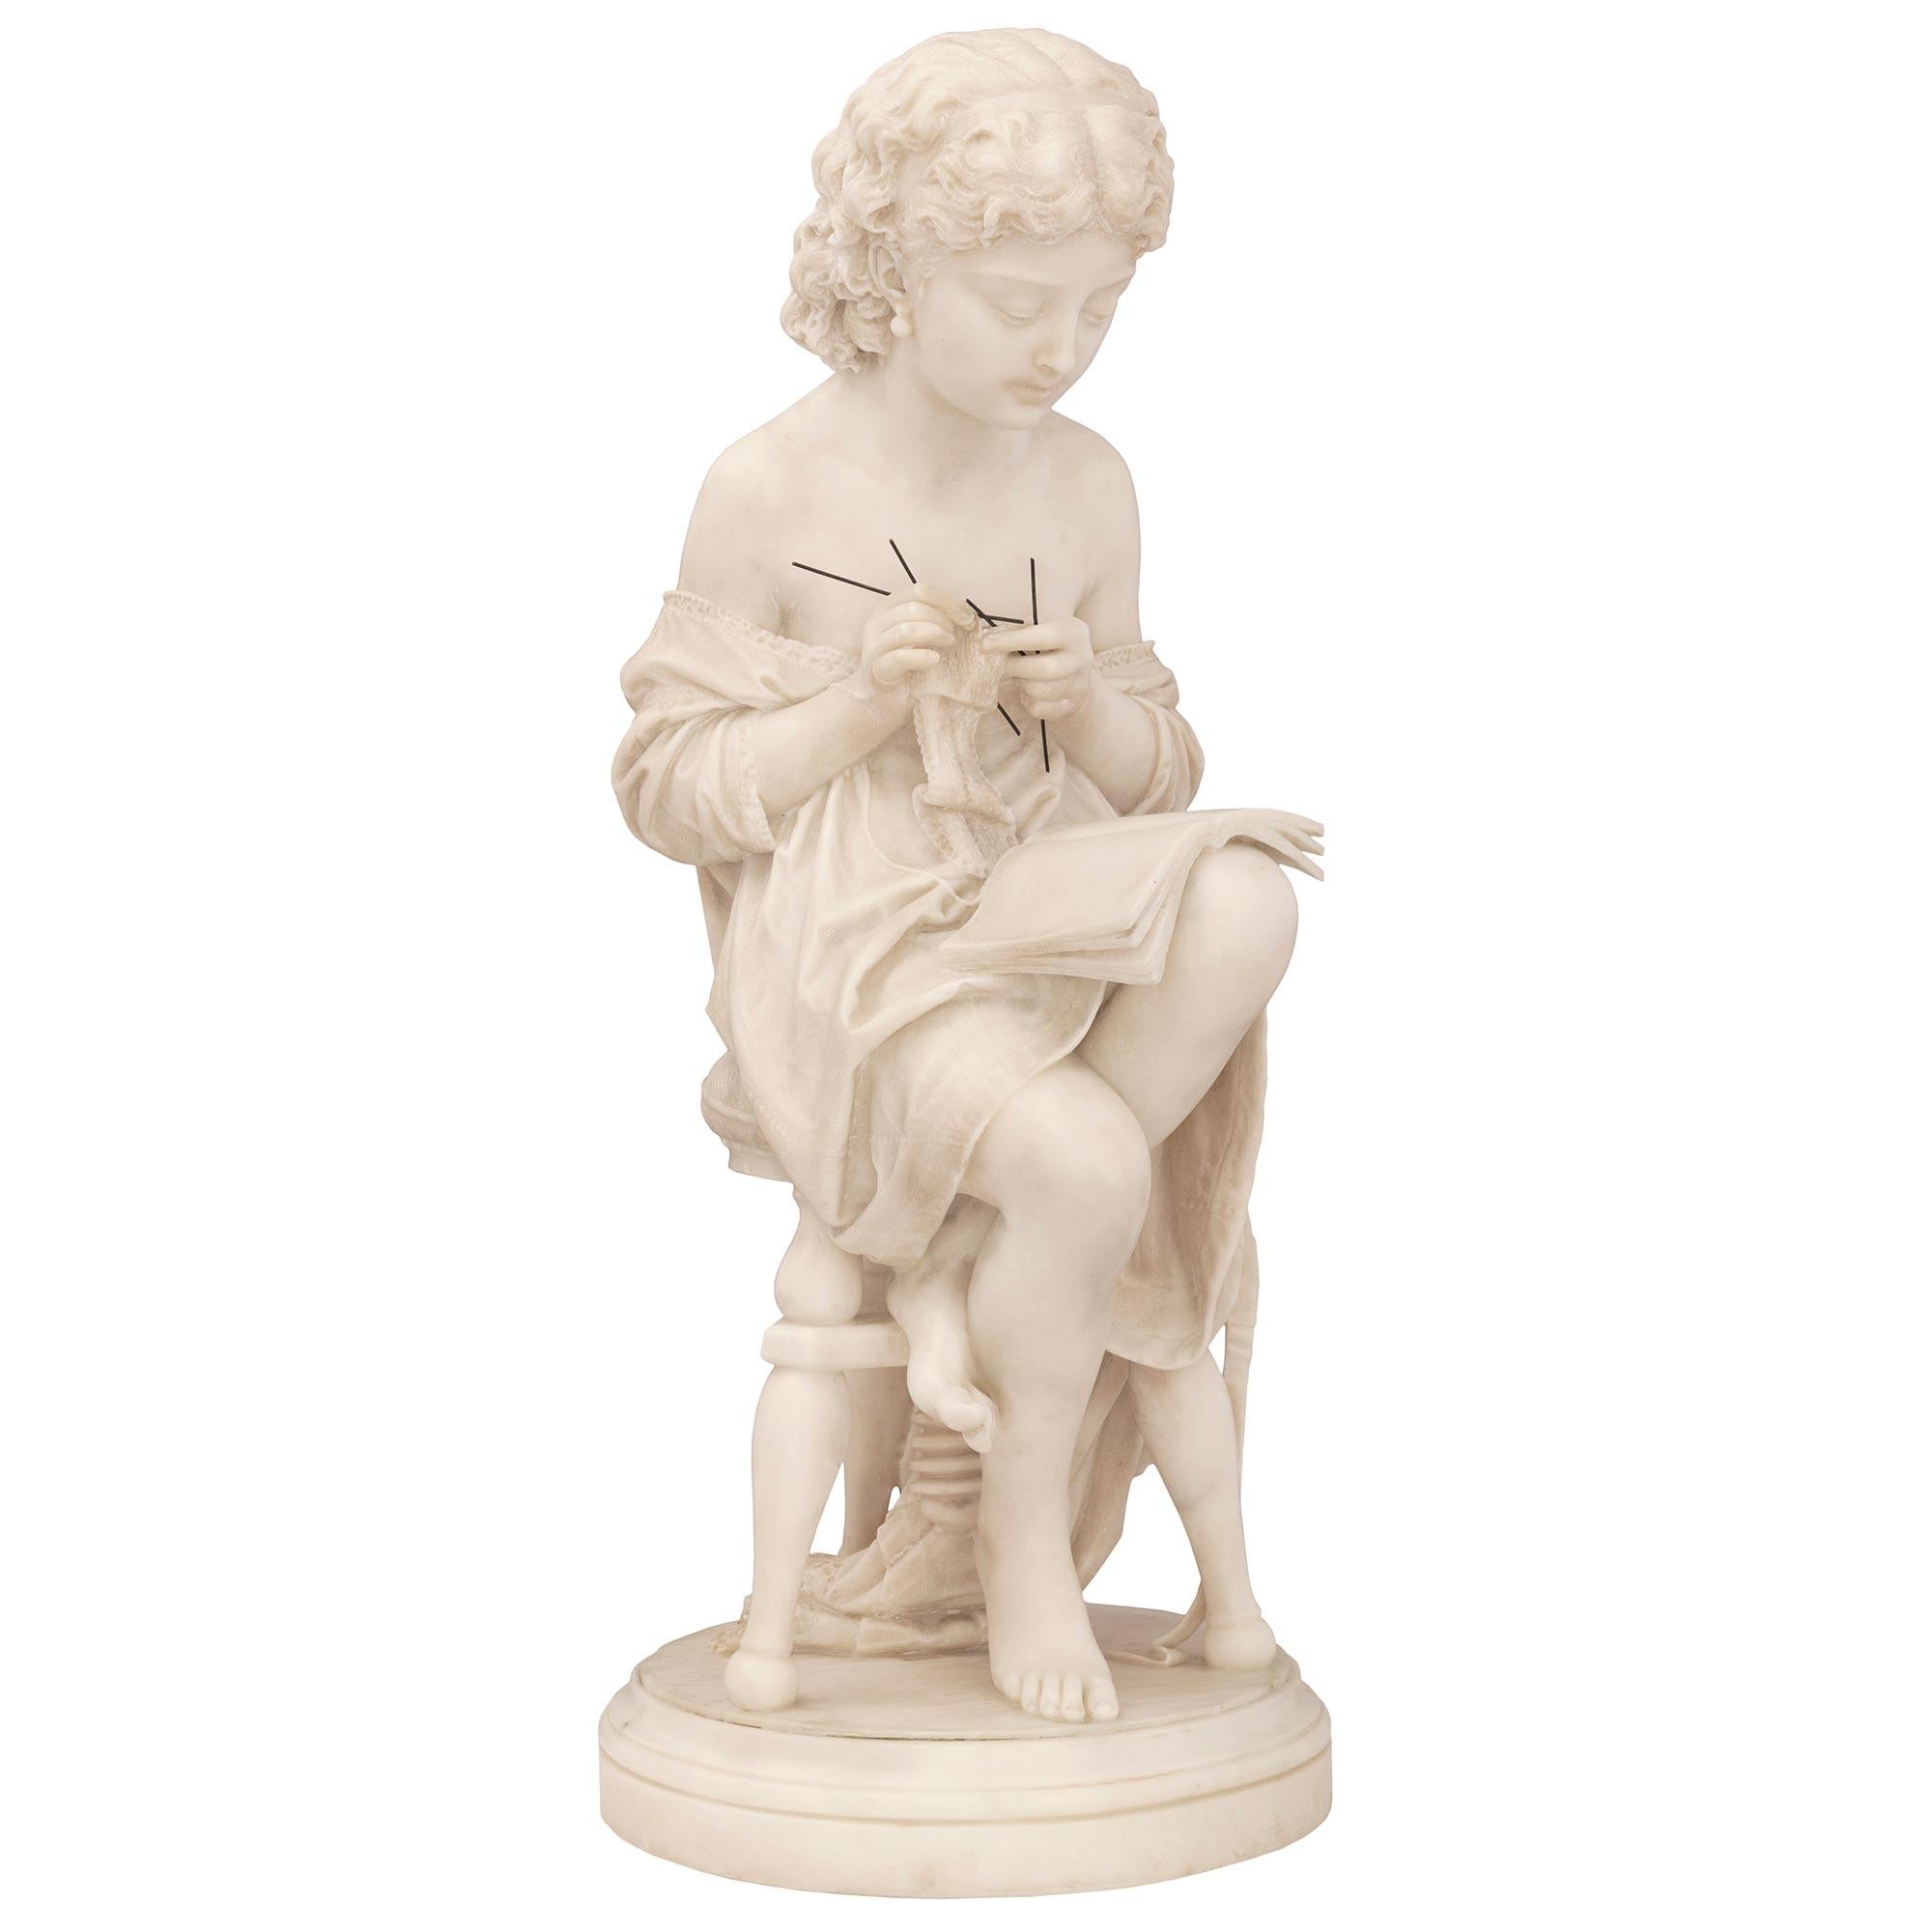 A sensational and extremely high quality Italian 19th century white Carrara marble statue of a young girl, signed UGO ZANNONI, MILANO 1882. The charming statue is raised by a circular mottled base. The beautiful young girl is sitting on a swivel